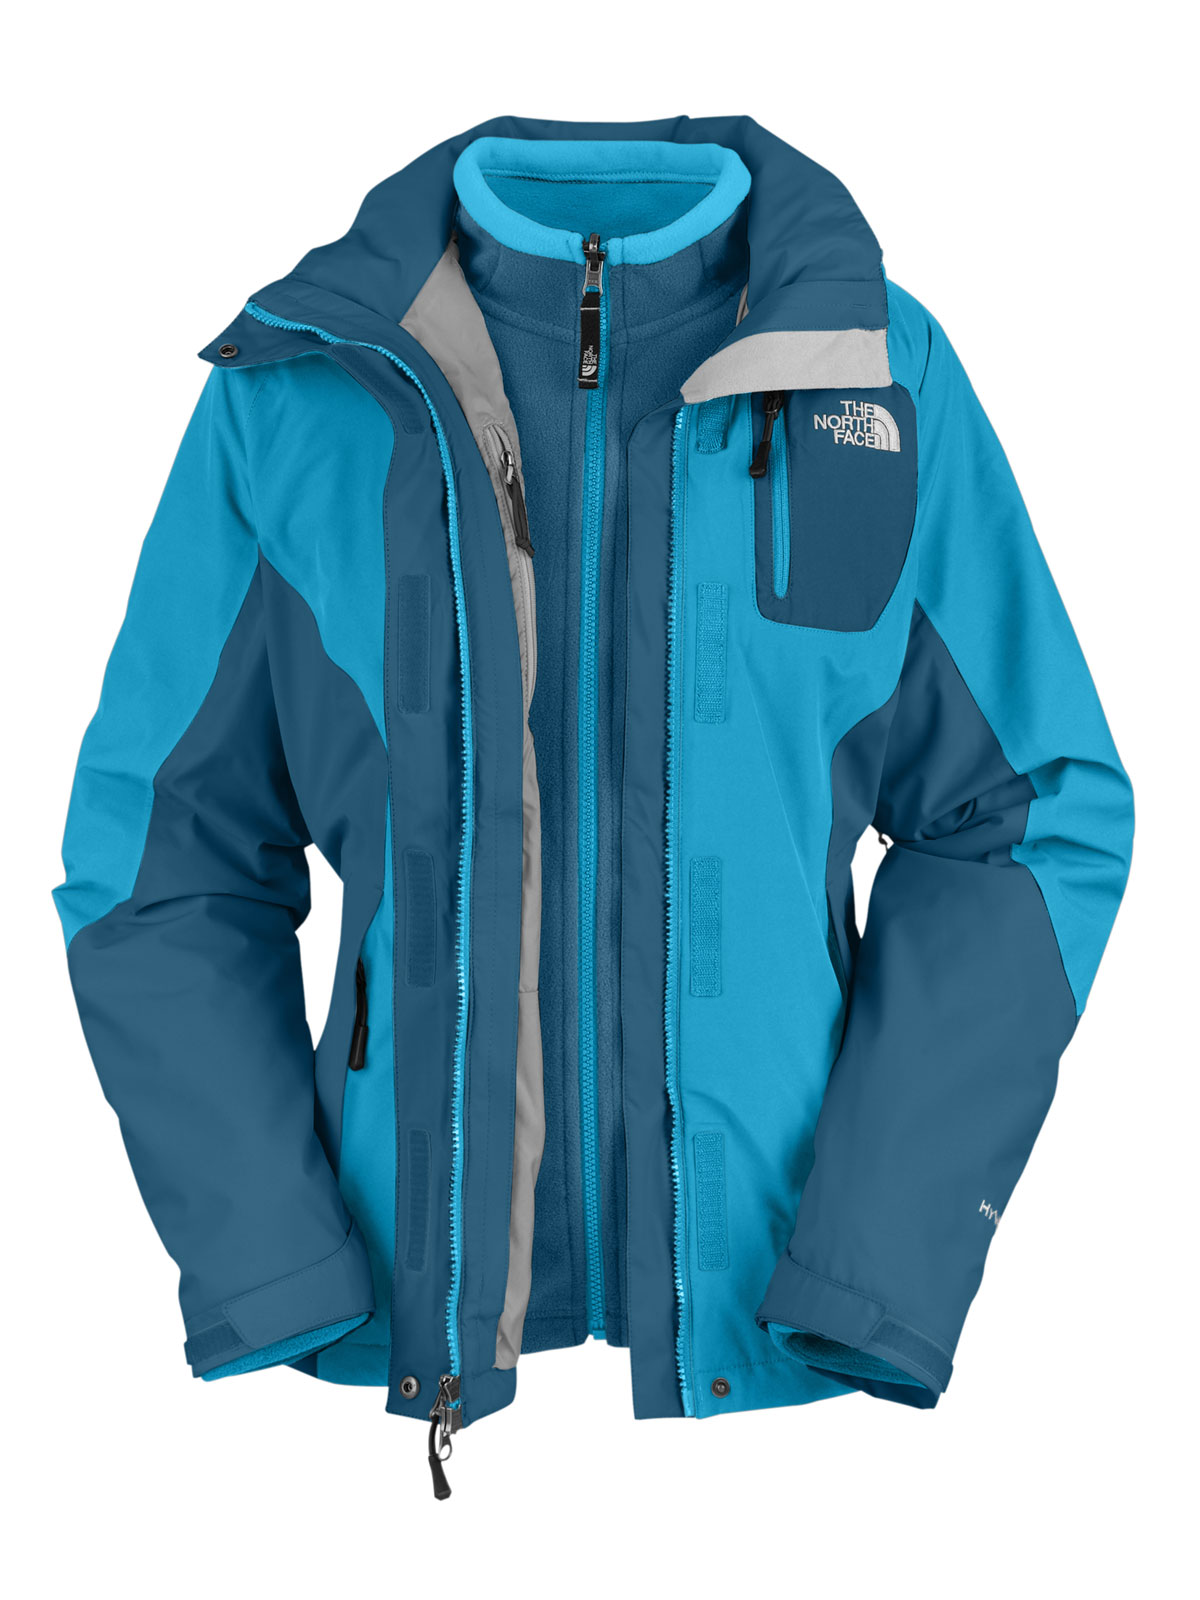 school jury hoogtepunt The North Face Atlas Triclimate Jacket Women's at NorwaySports.com